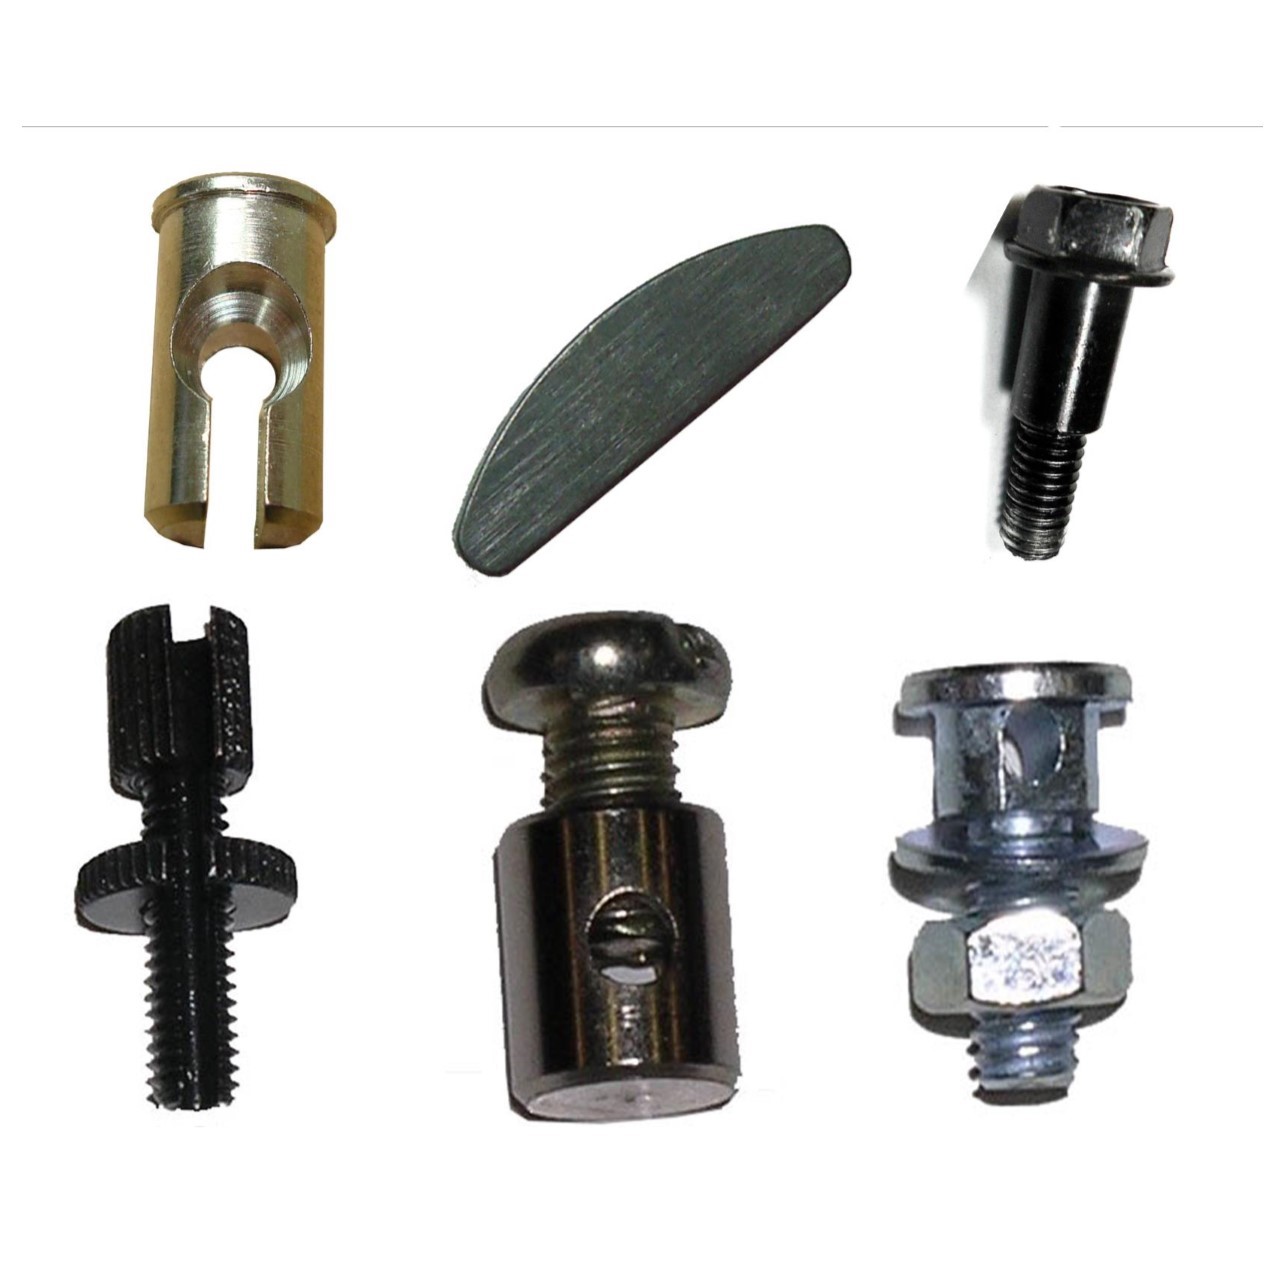 Anchors, Fasteners, Adjusters